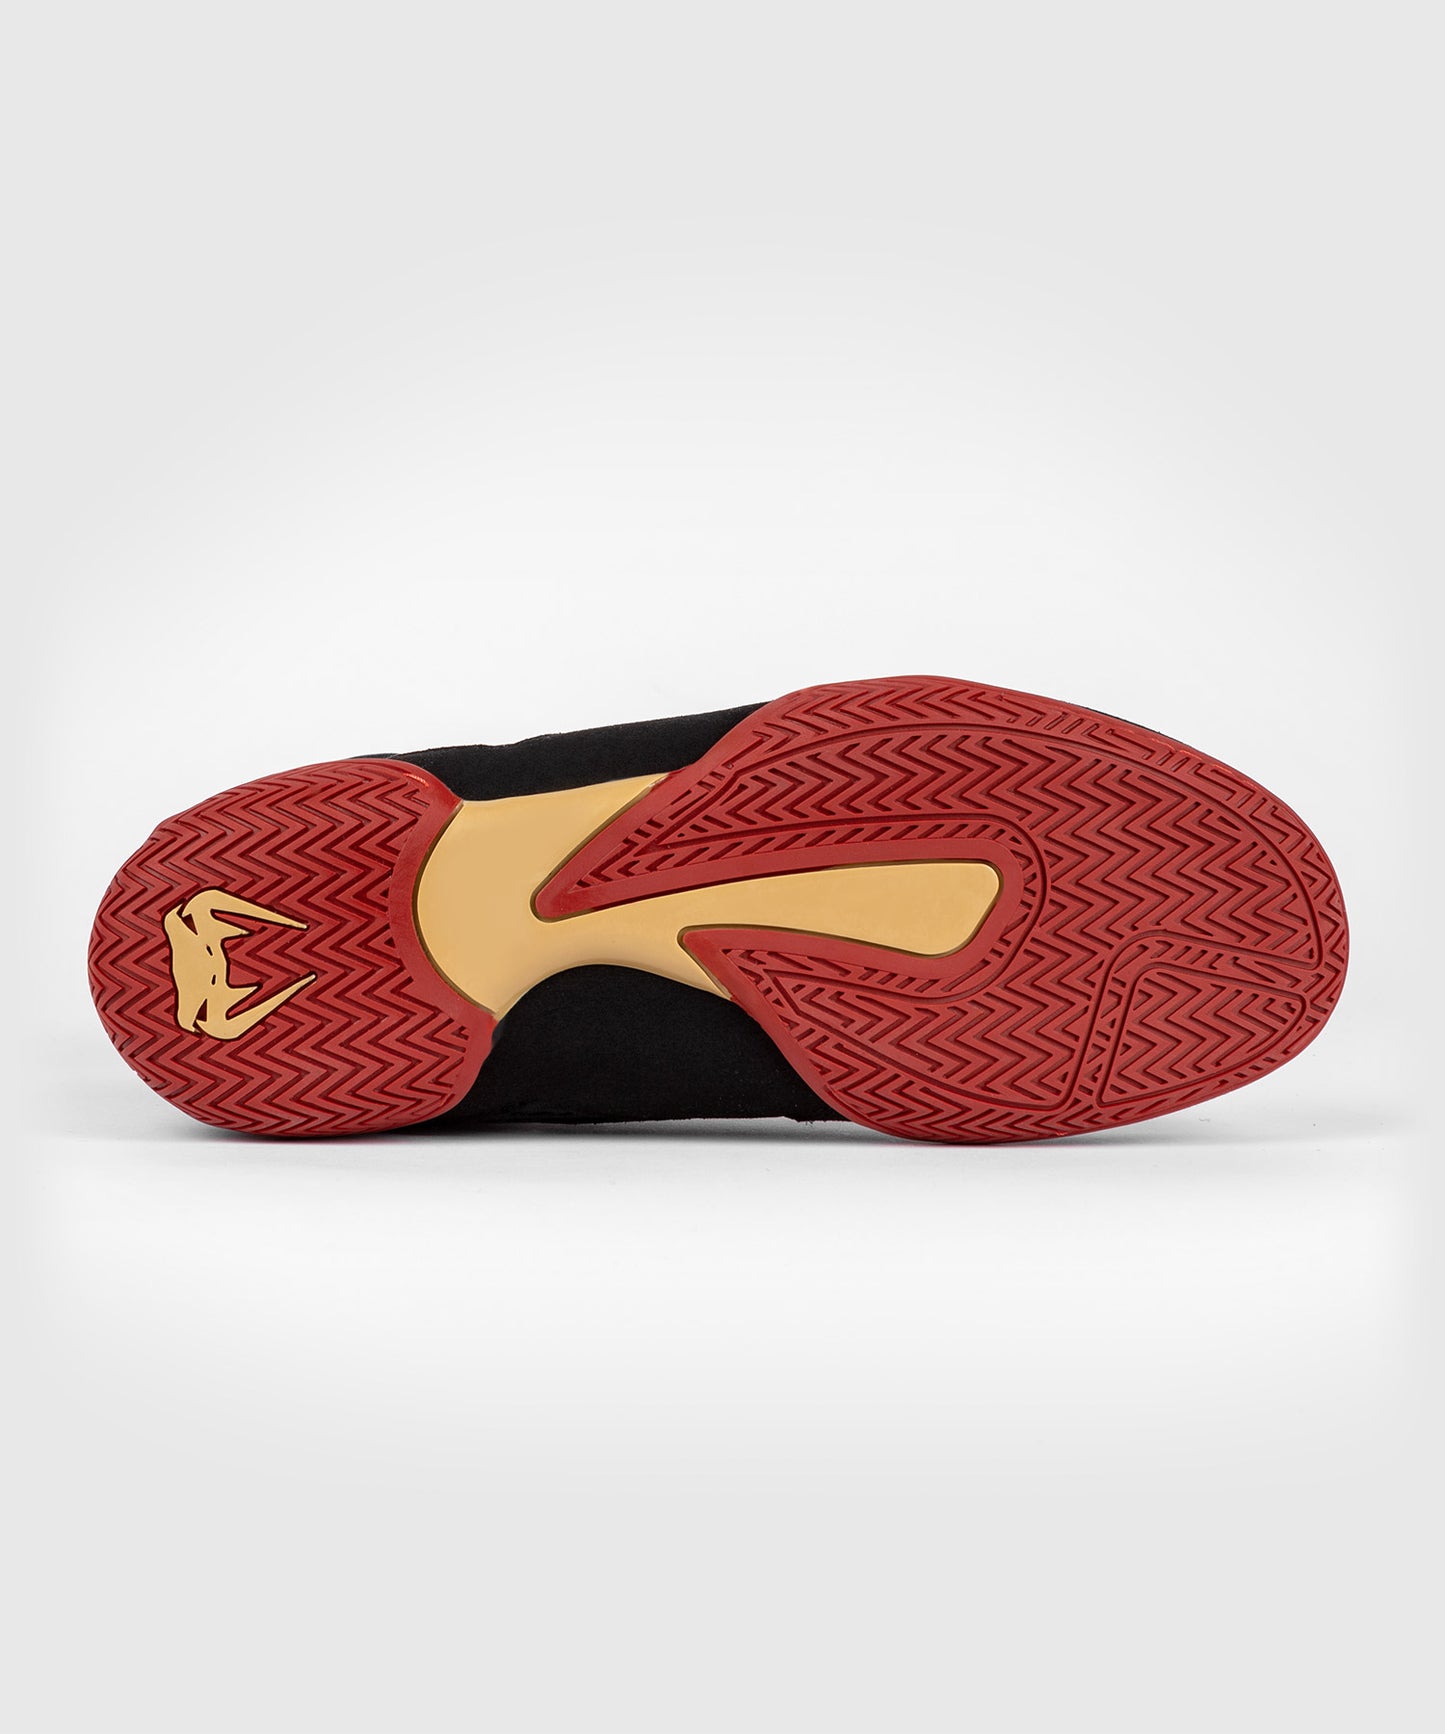 Venum Contender Boxing Shoes - Black/Gold/Red